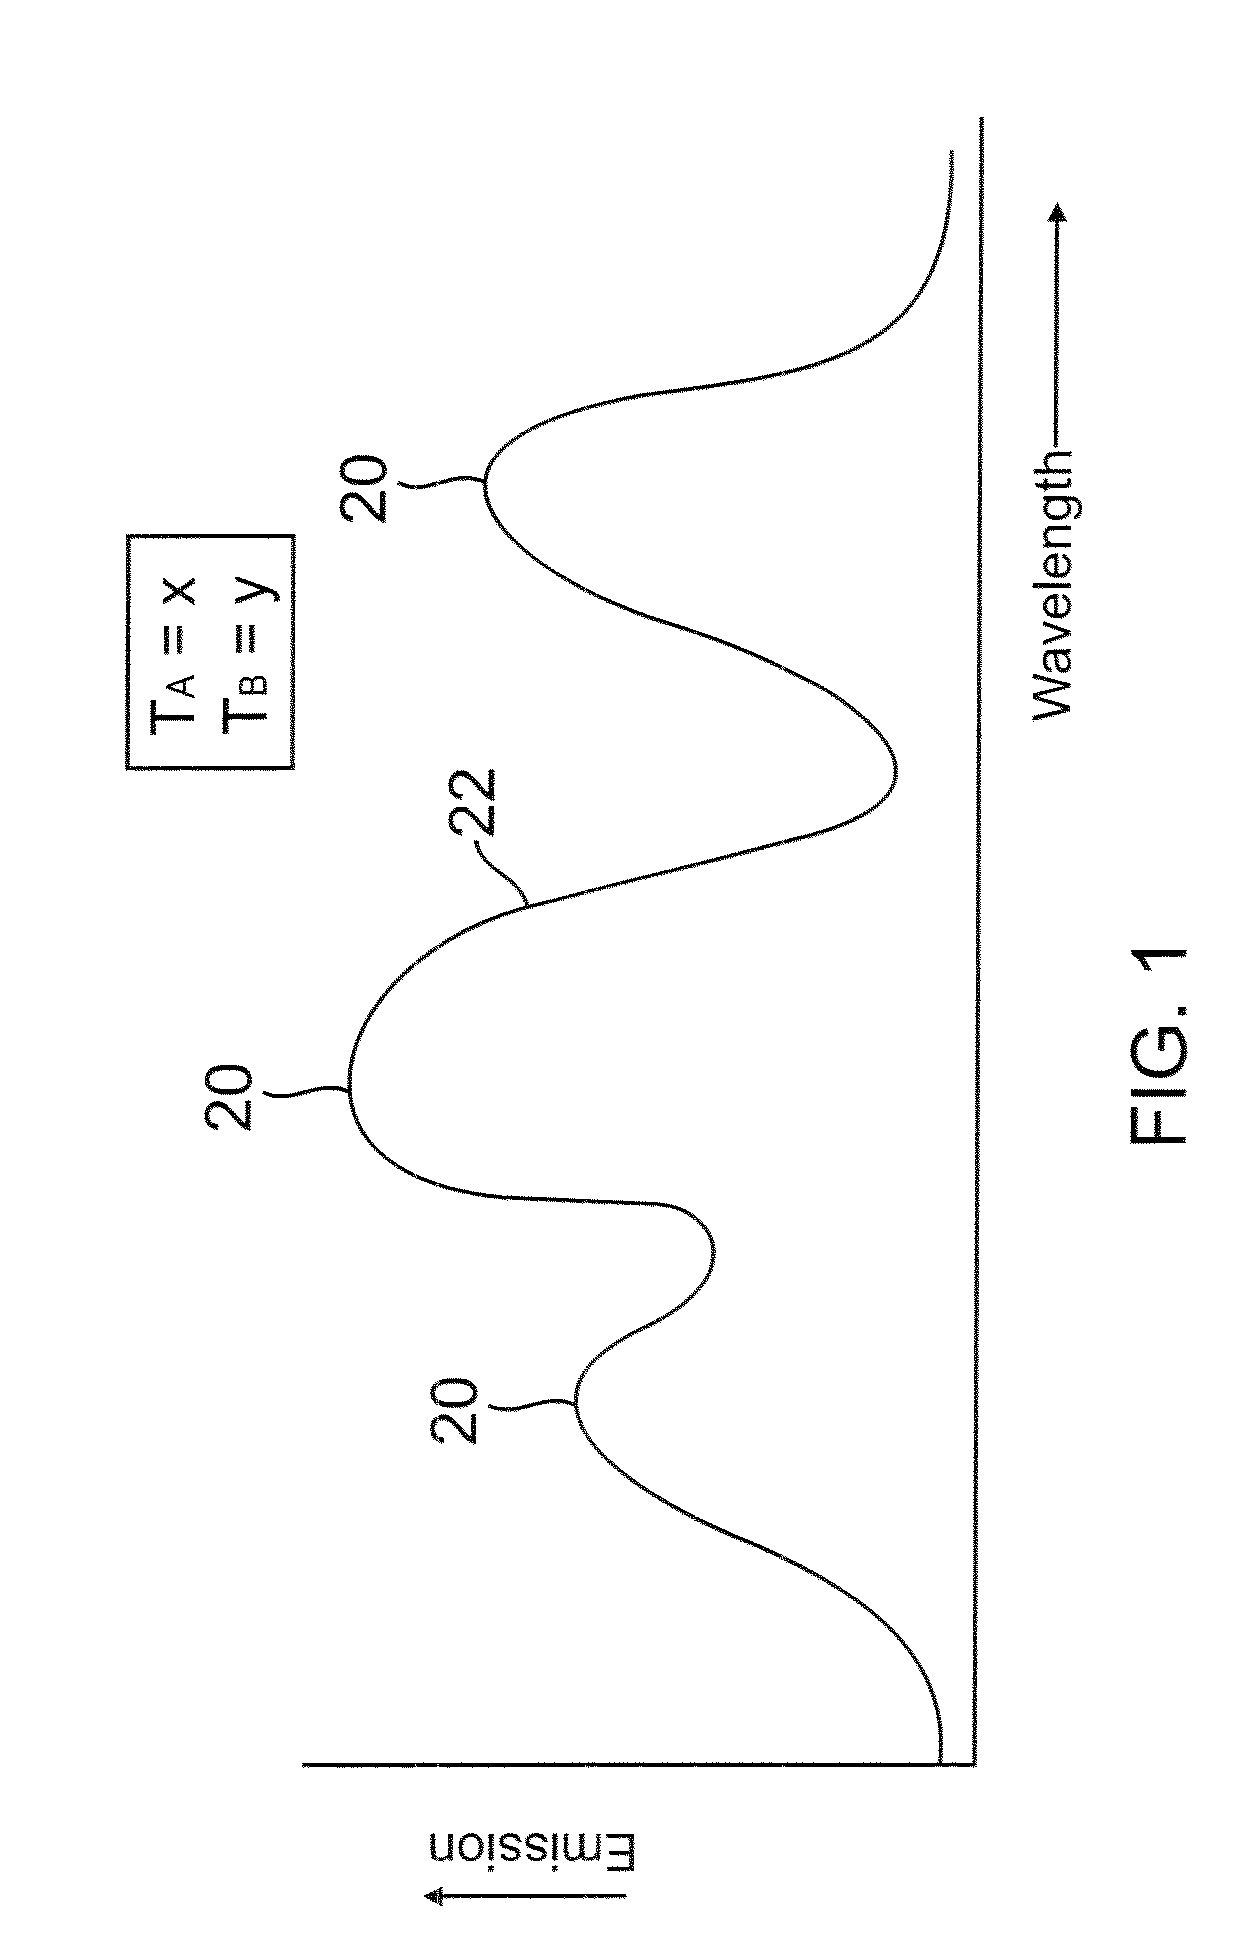 Apparatus and methods for non-invasive measurement of a substance within a body